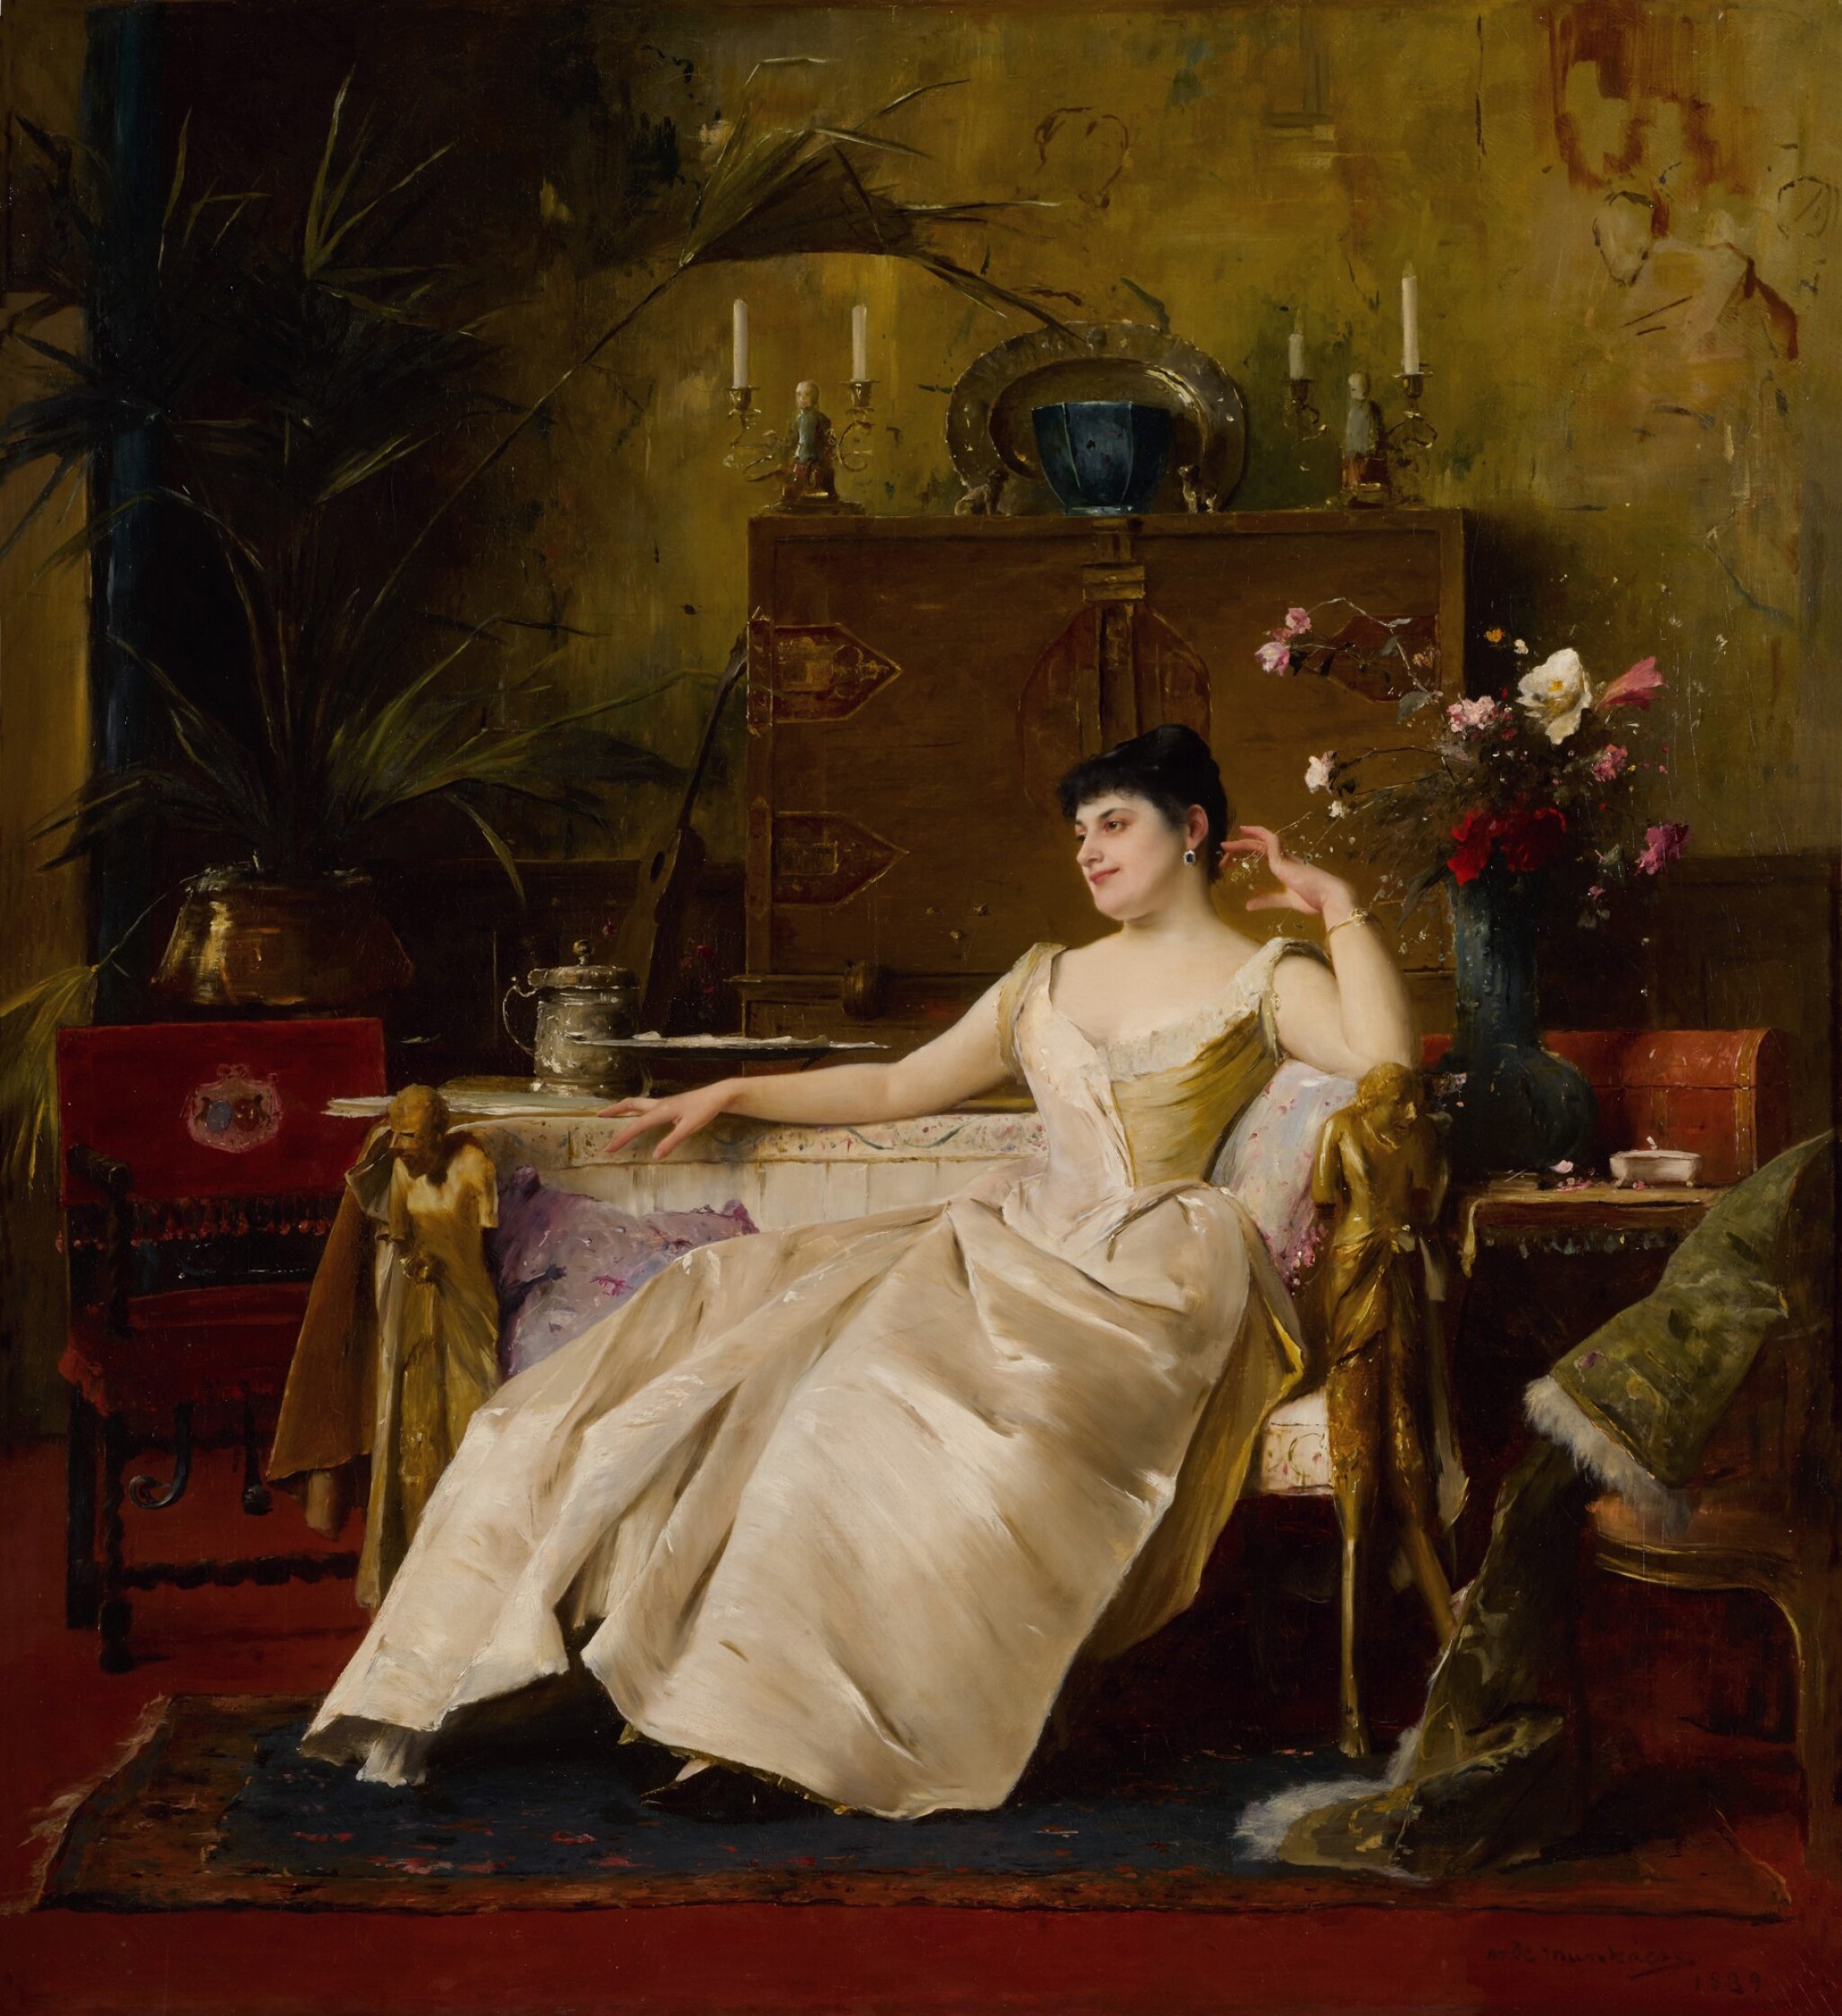 portrait of a woman in an elegant interior - Mihály Munkácsy’s Portrait of Princess Soutzo - 19th-century